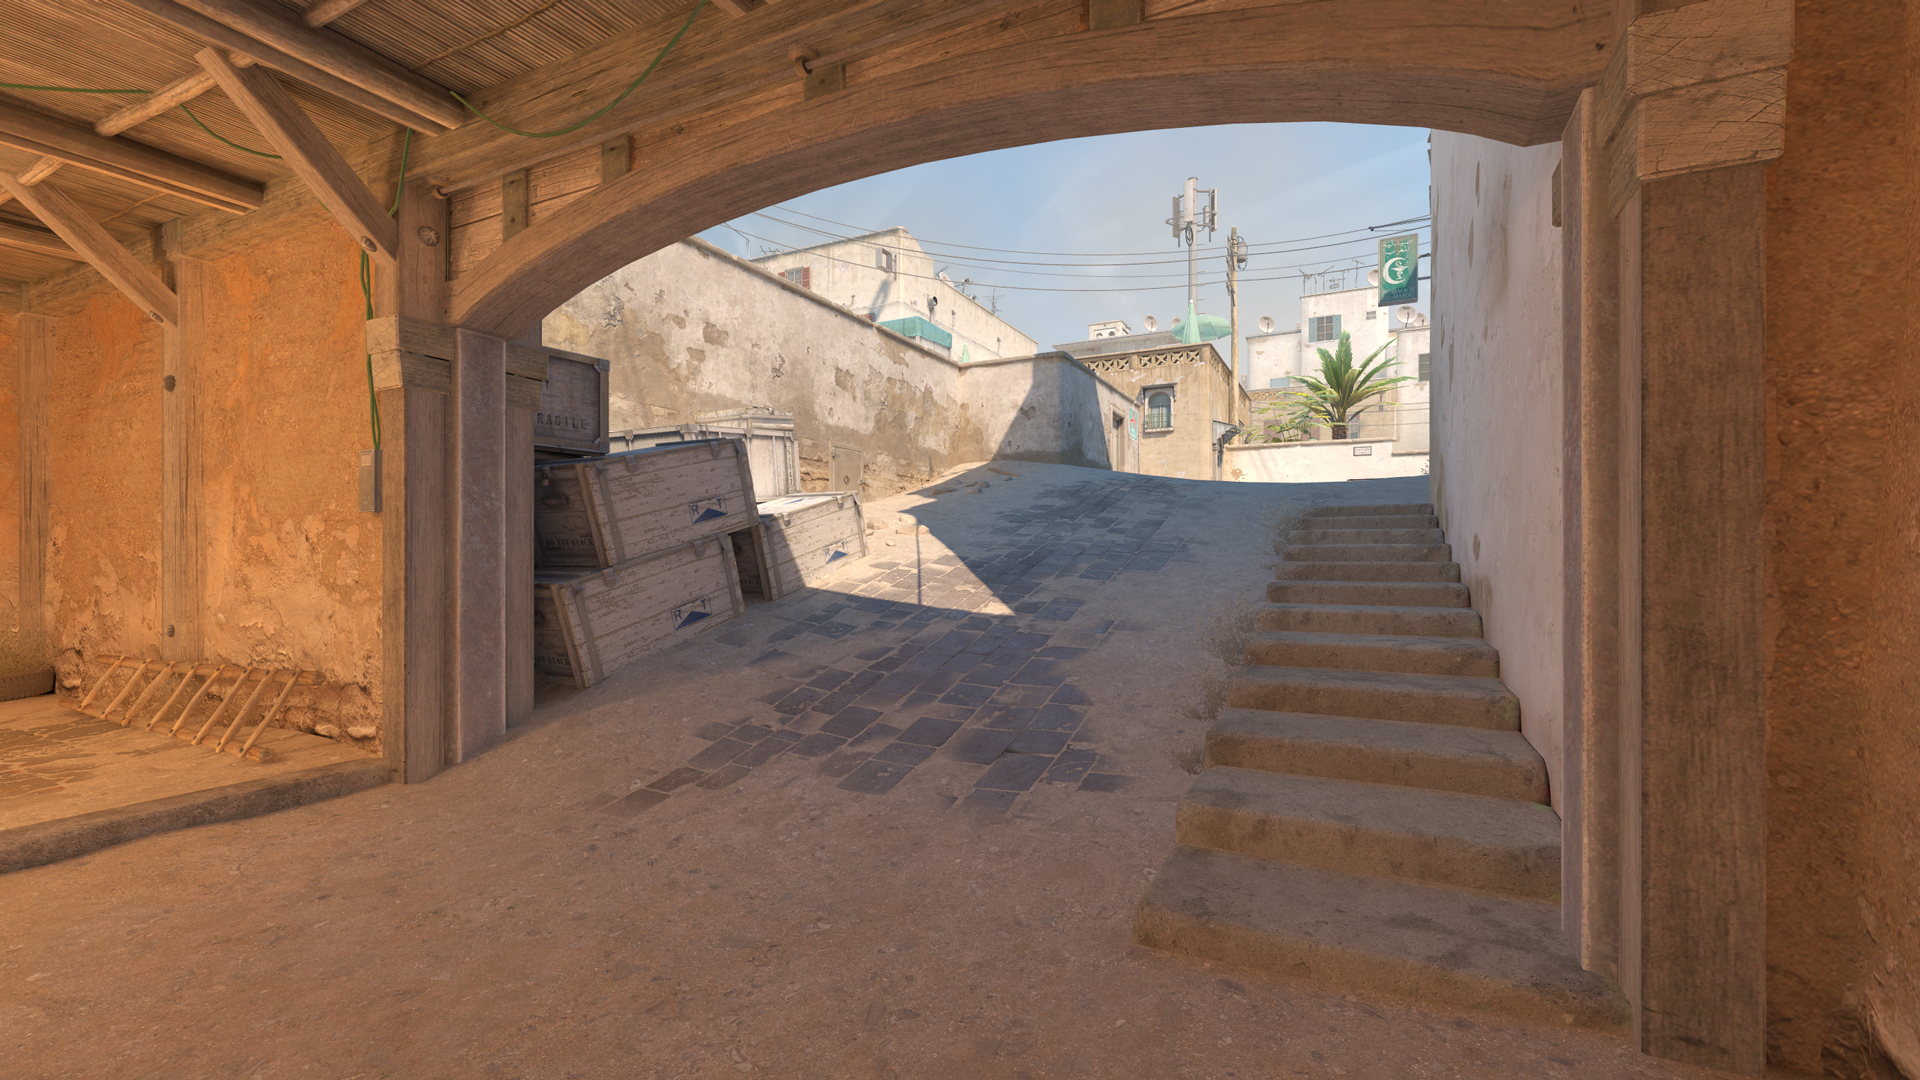 Counter Strike 2 Dust 2 map